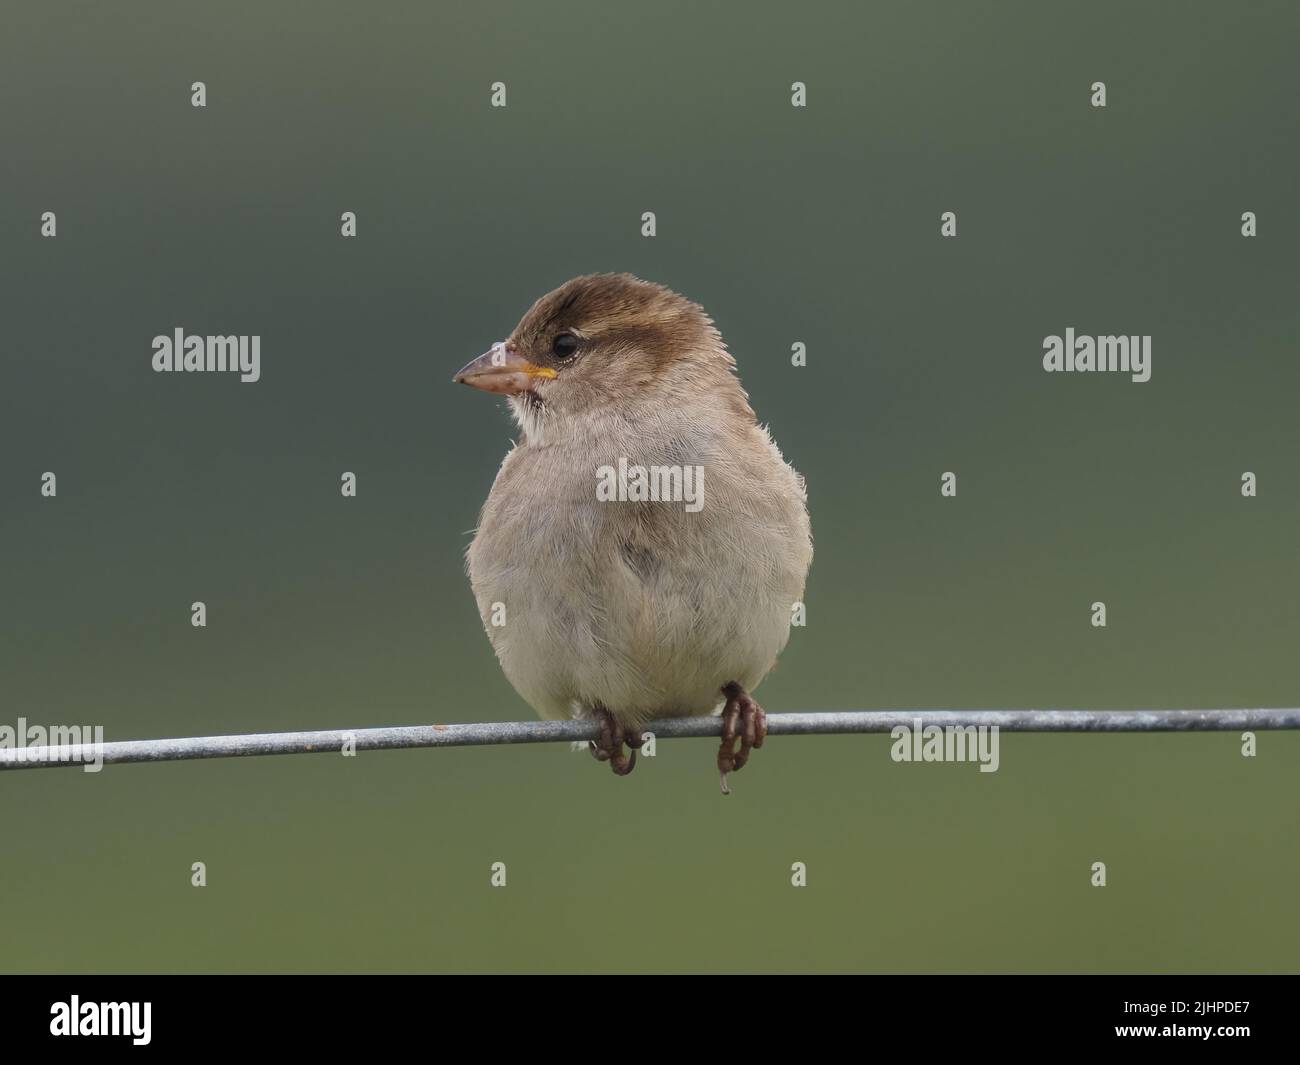 House sparrows are declining in many areas, but are often found in family or communal parties. Stock Photo